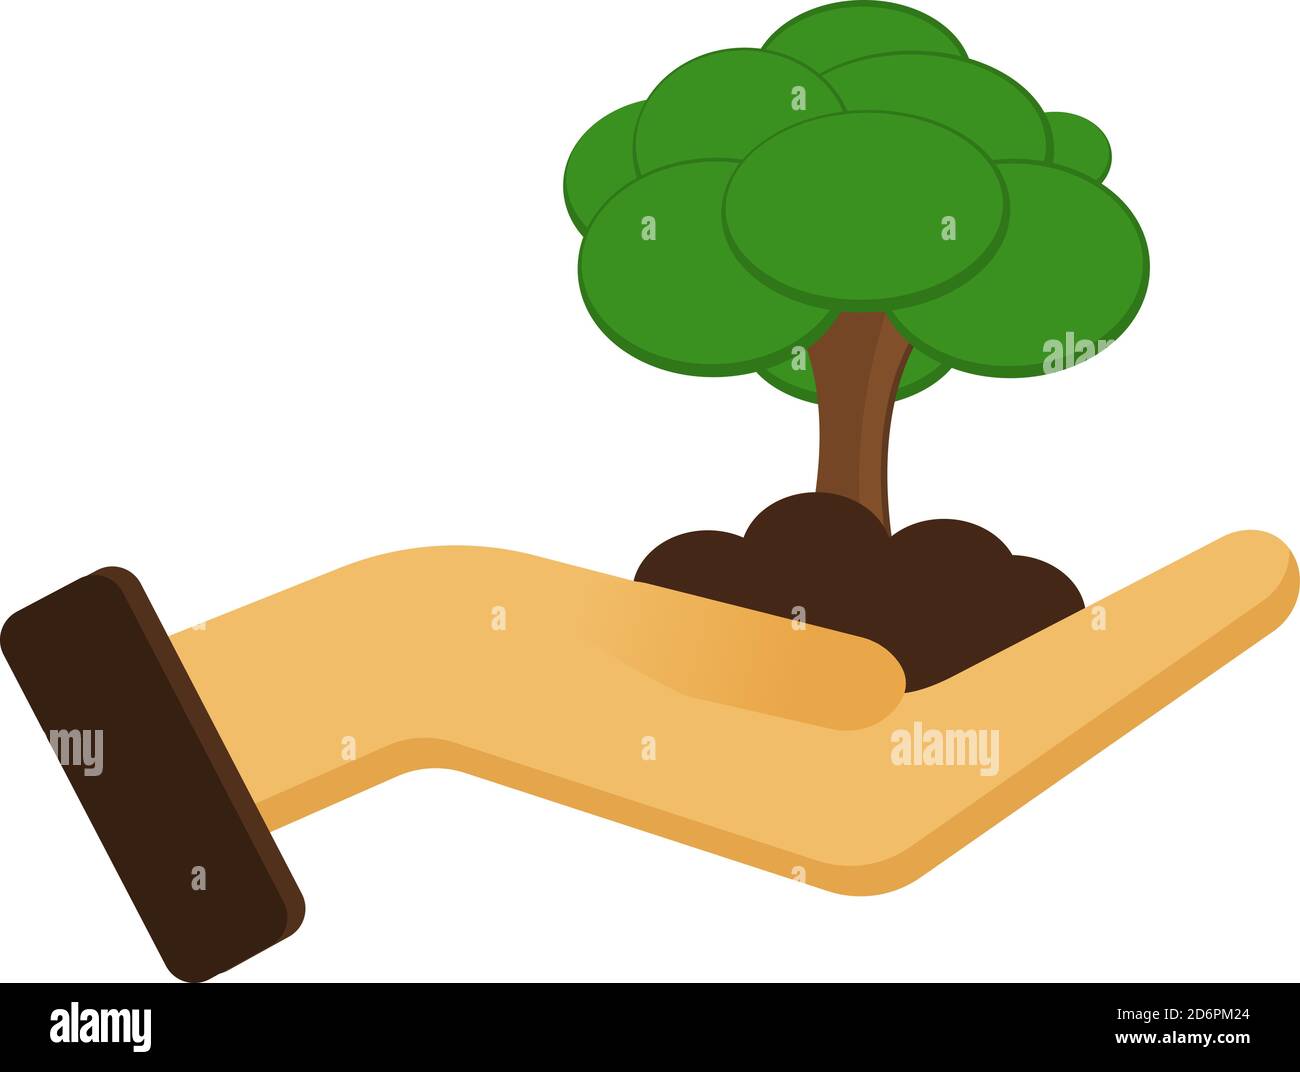 Save trees ,illustration, vector on white background Stock Vector ...